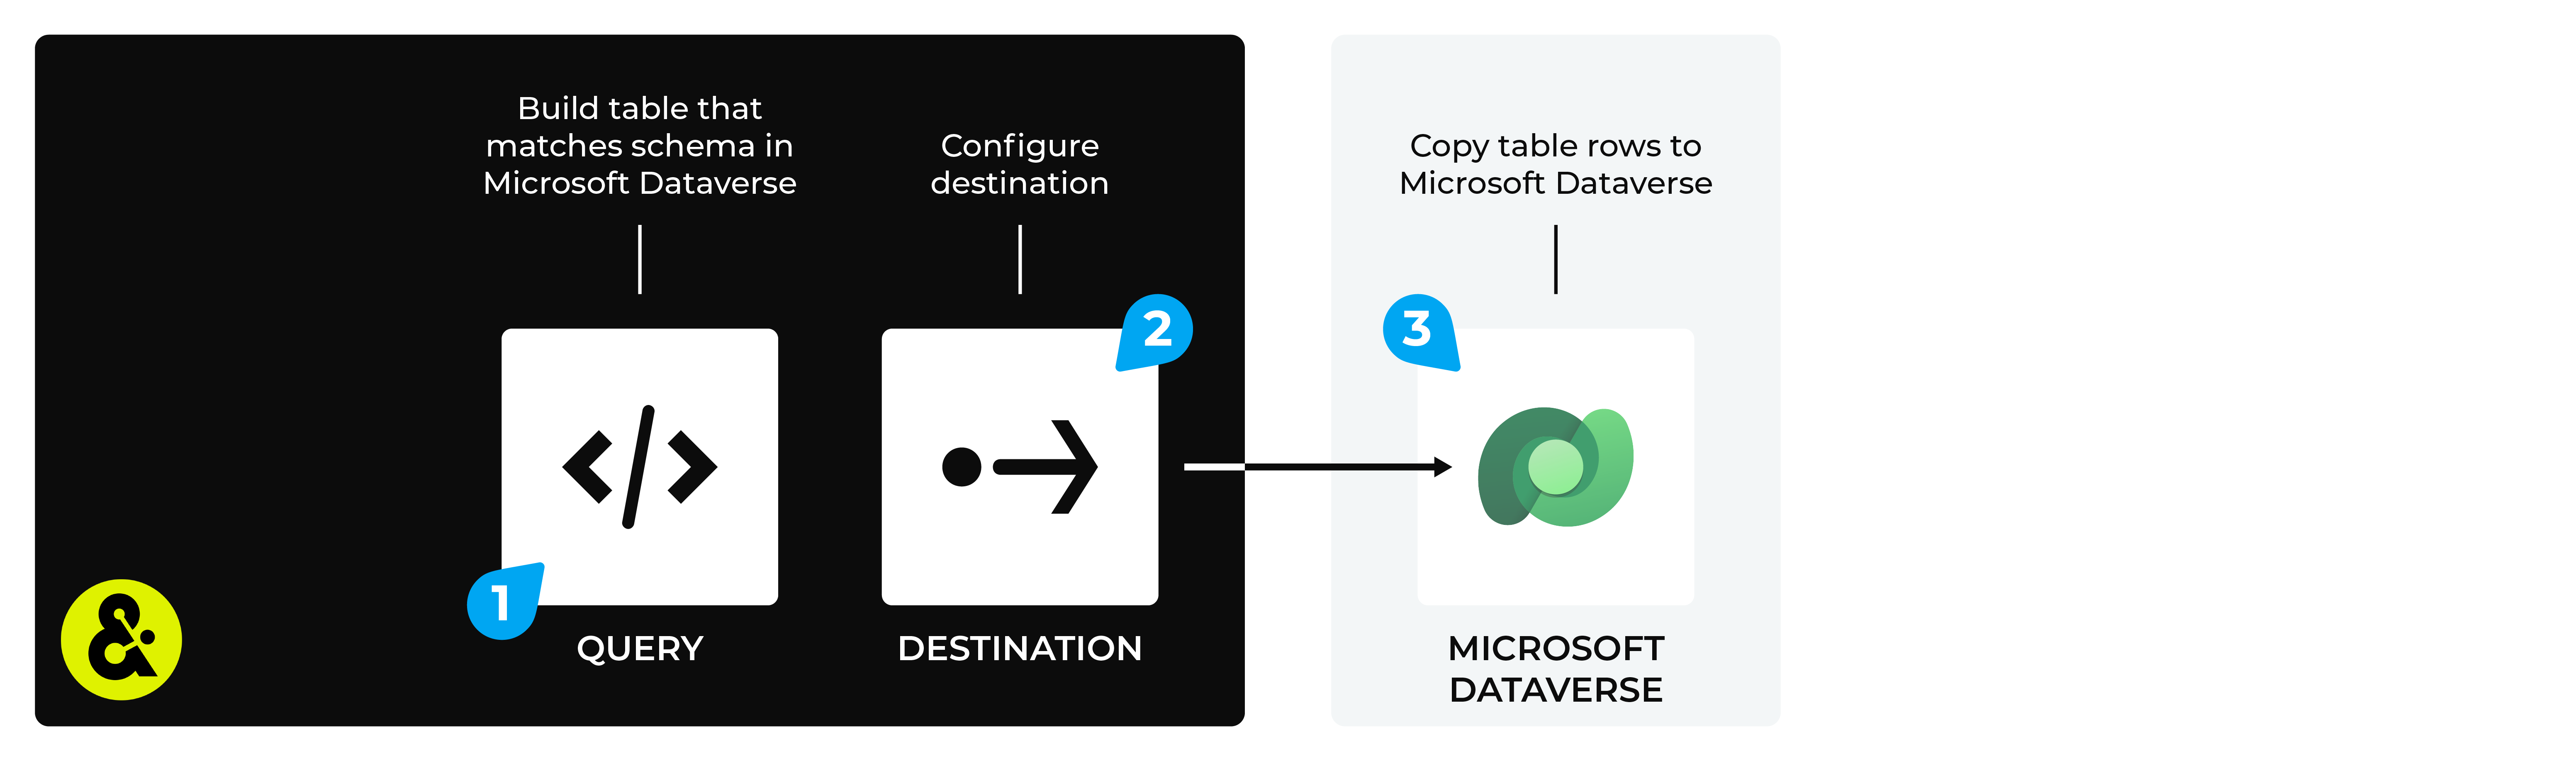 Send rows of data from Amperity to Microsoft Dataverse.